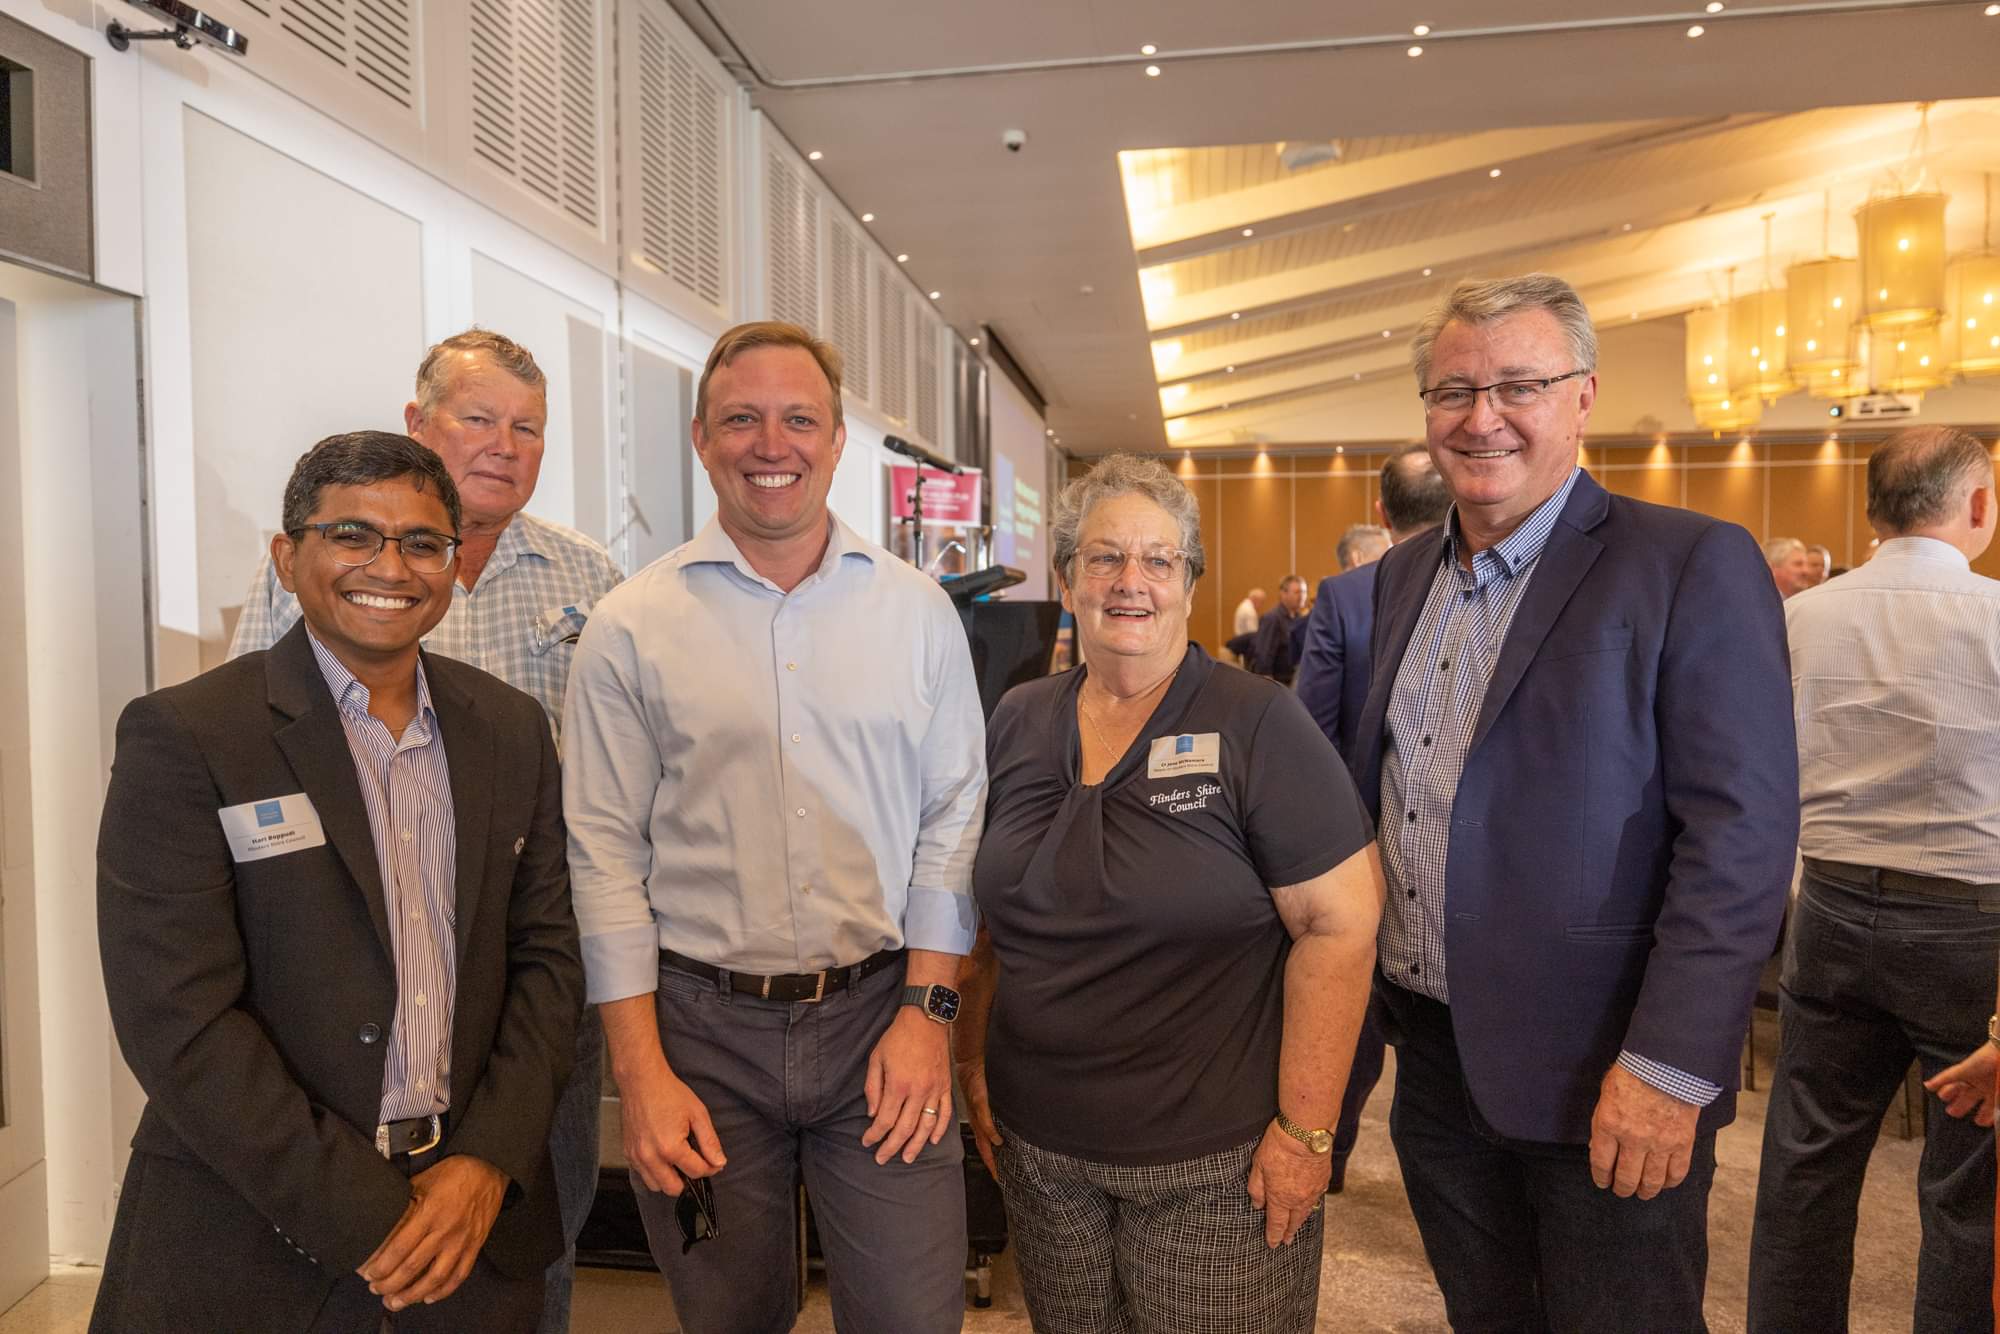 Flinders Shire Council’s Mayor and Chief Executive Officer recently met with key stakeholders in Canberra and Brisbane to progress several potential economic drivers for the region.